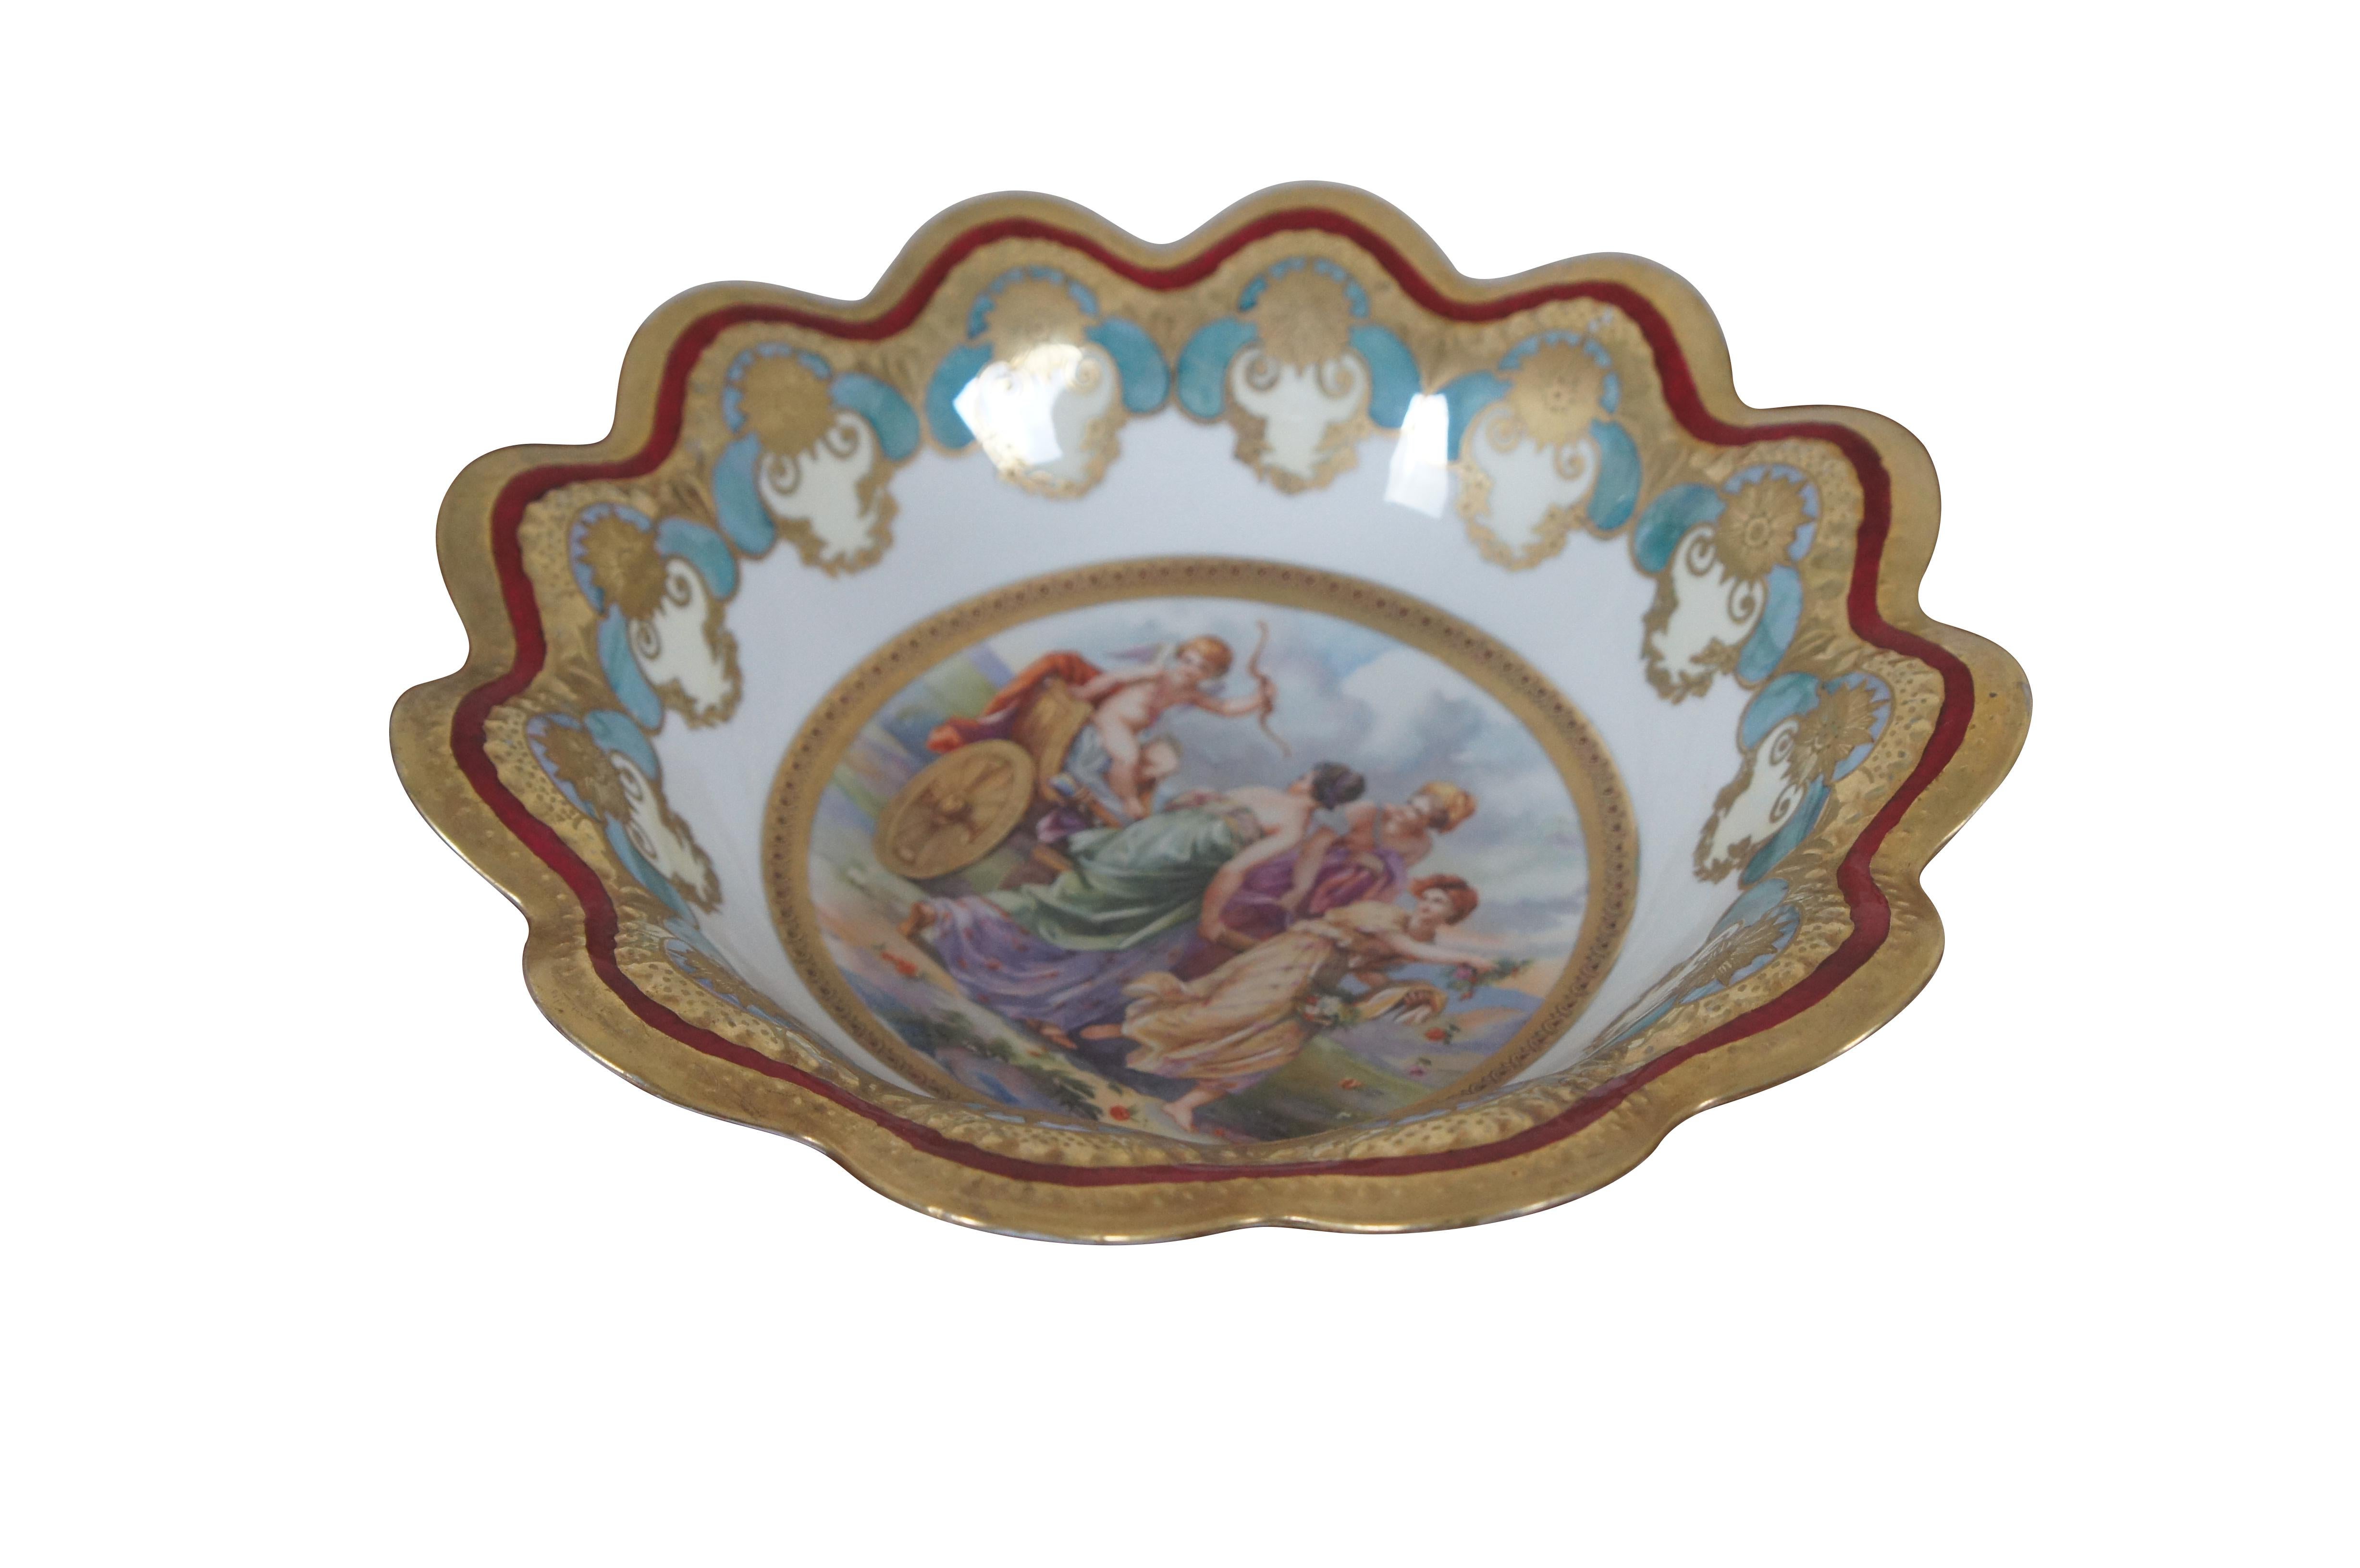 Antique Austrian scalloped porcelain bowl featuring a gold, turquoise and red Neoclassical theme with a Cherub riding in chariot led by three flower girls.

The Stara Role (Altrohlau) pottery works were established in 1810 by Benedict Haßlacher. The